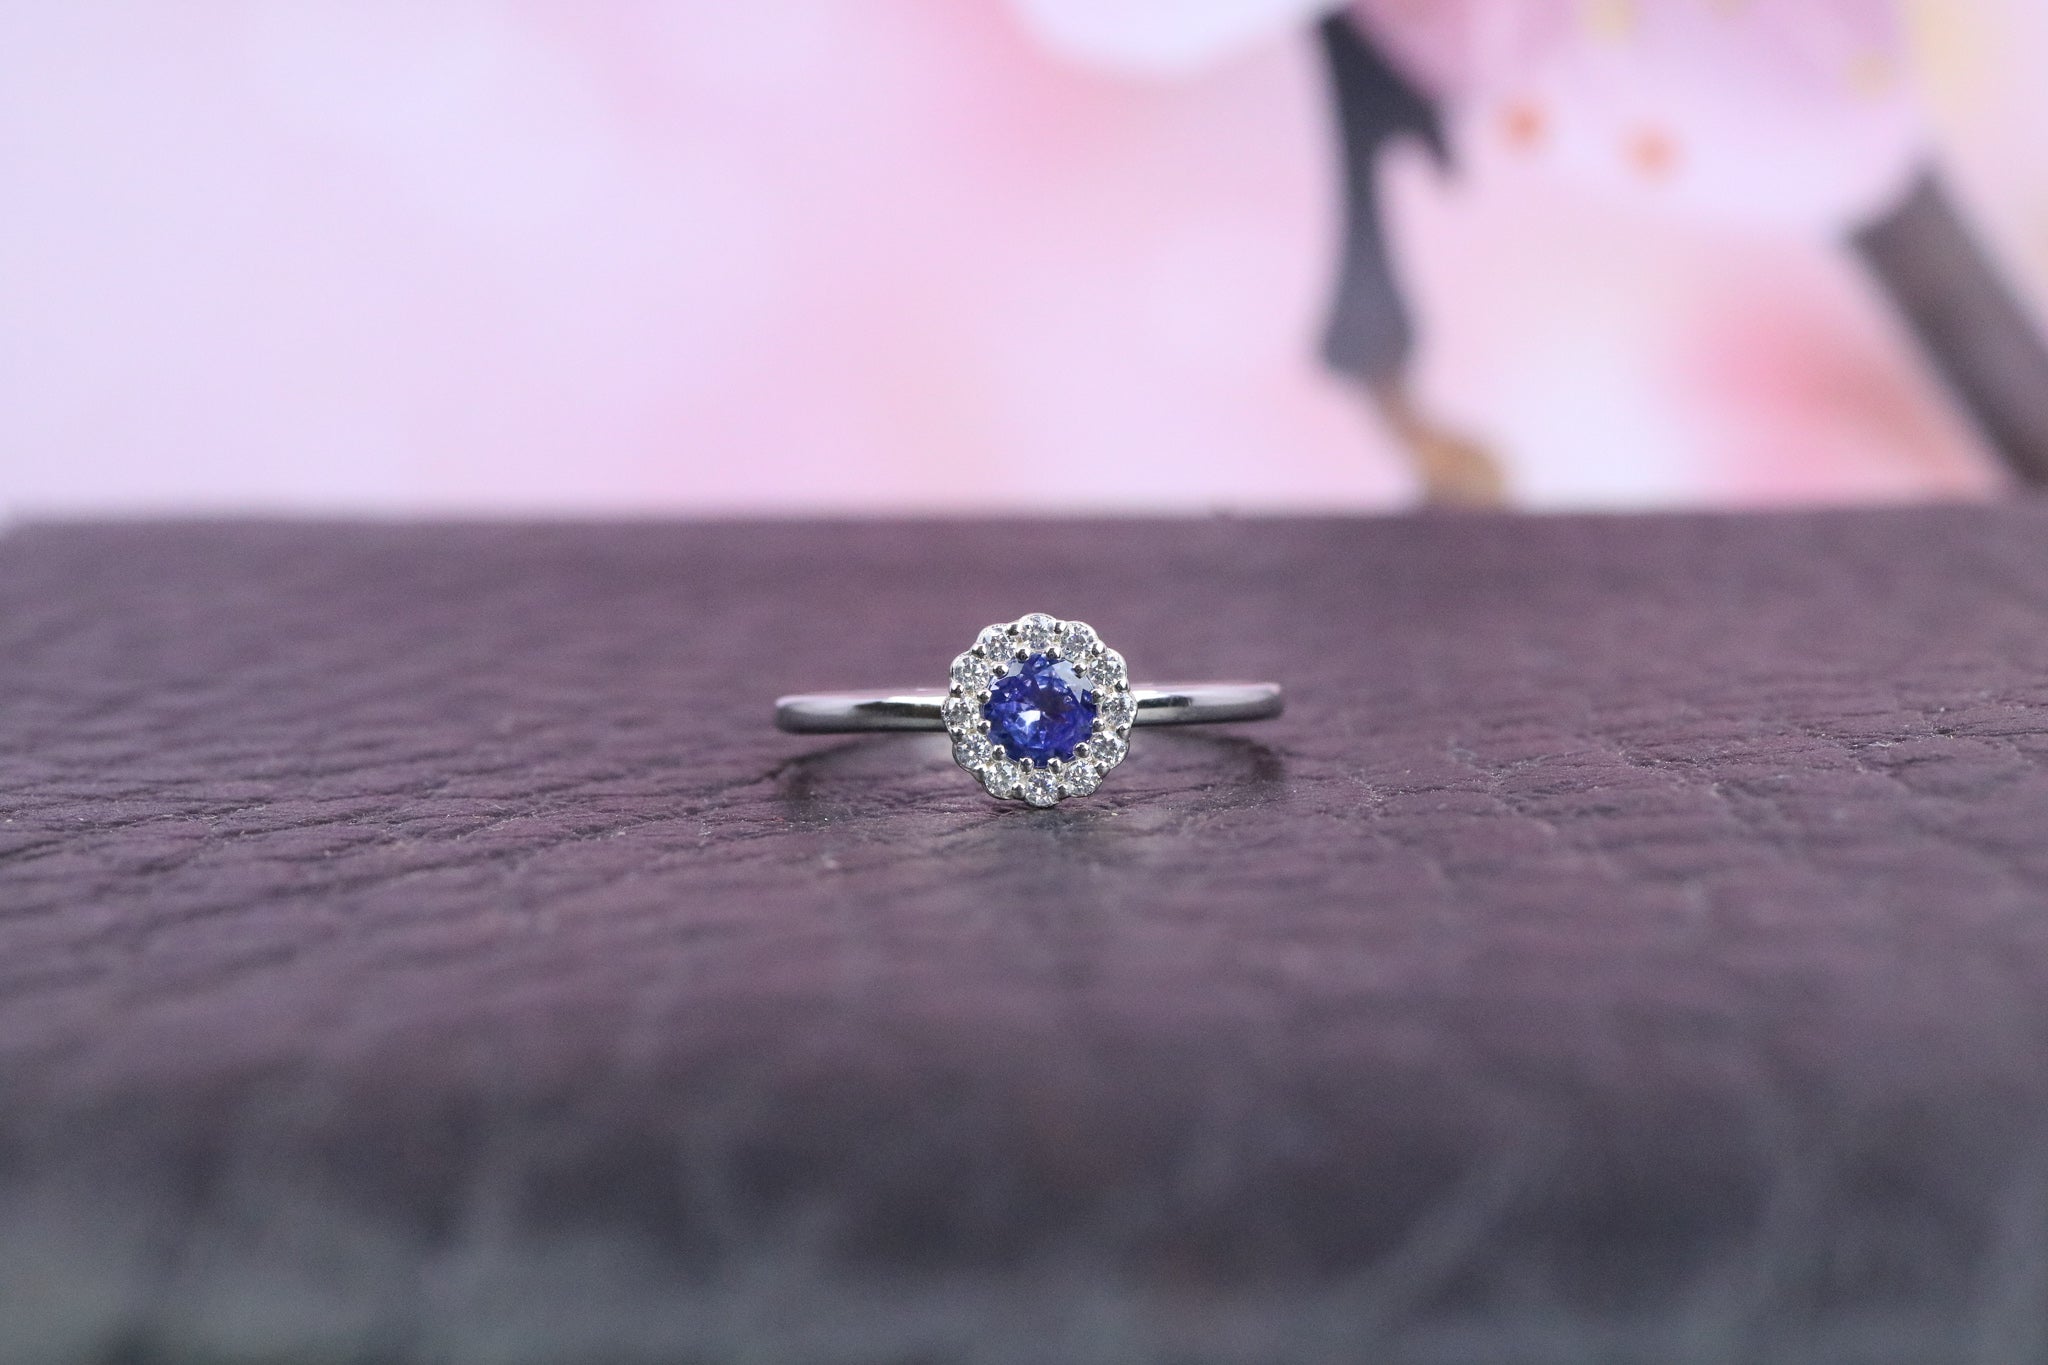 Sterling Silver & December Birthstone Ring - AK1101 - Hallmark Jewellers Formby & The Jewellers Bench Widnes